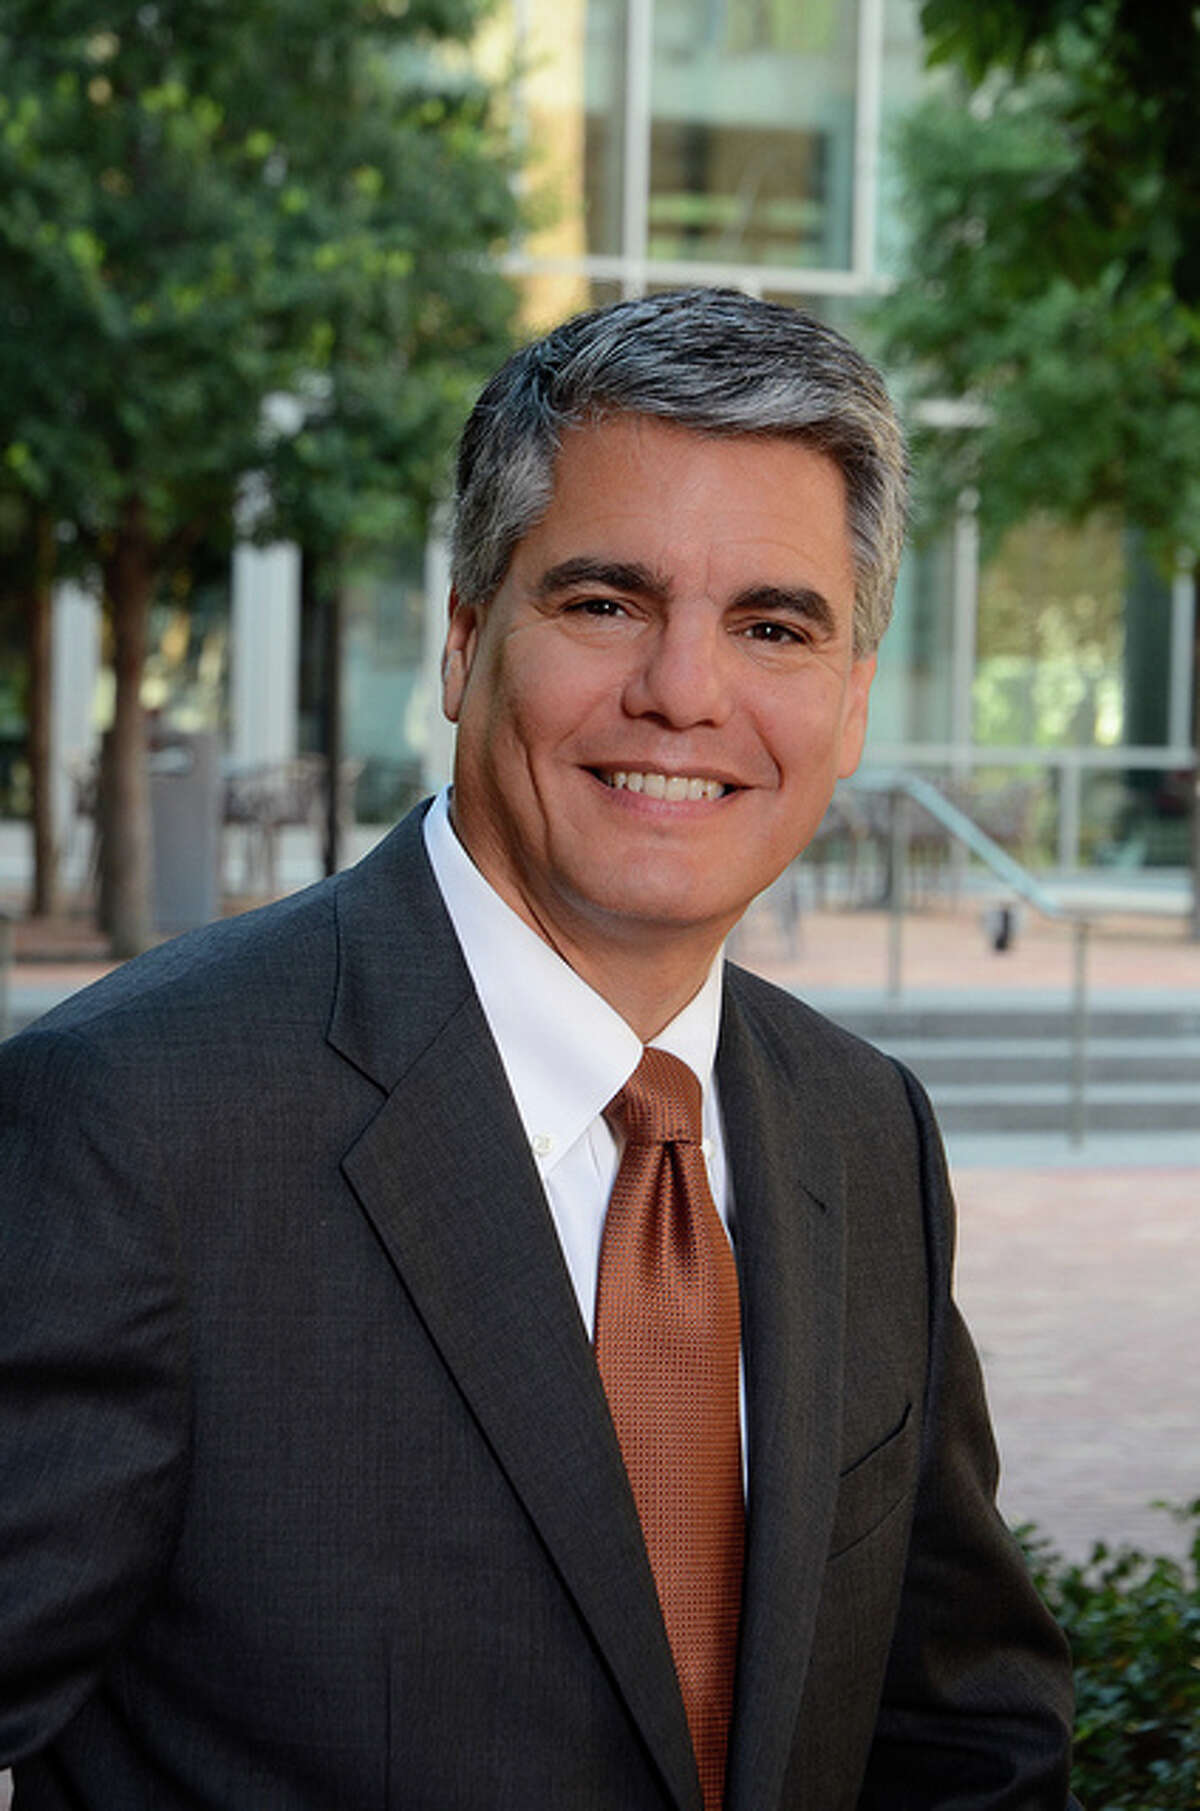 University of Texas at Austin Provost Gregory L. Fenves